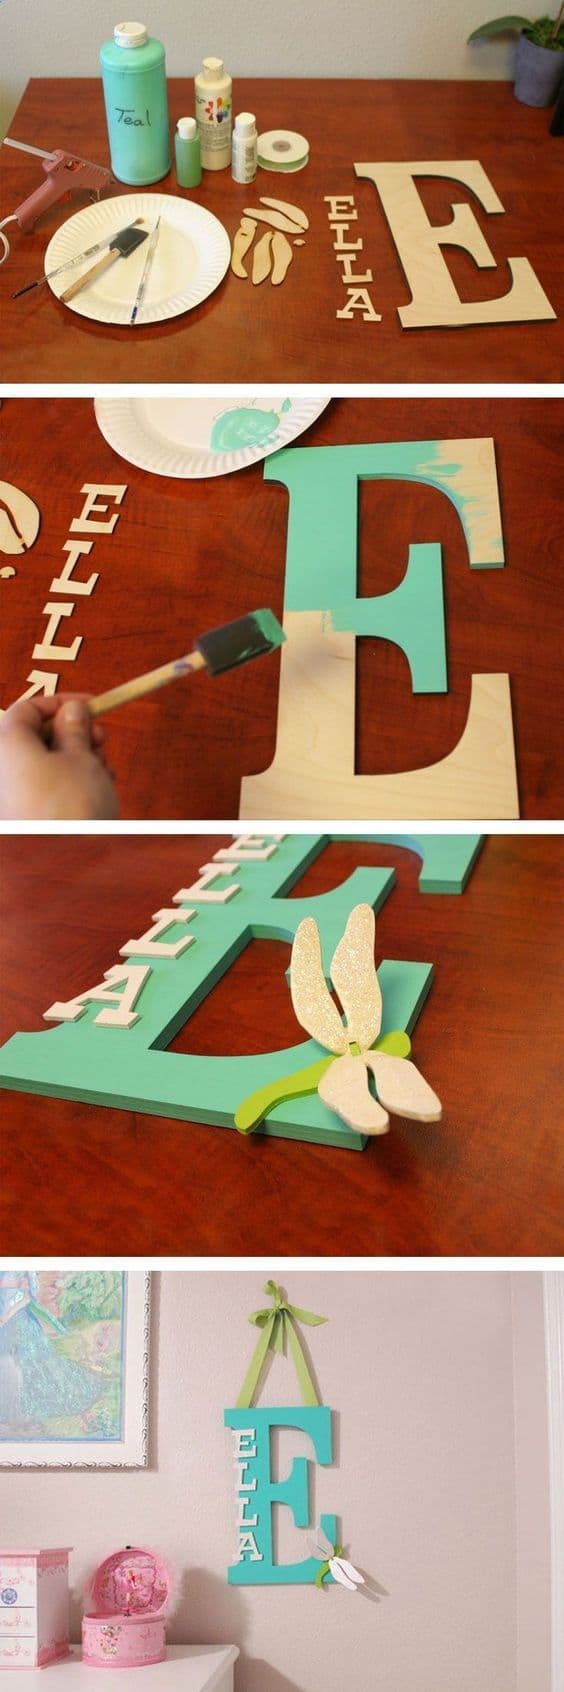 Decorating Baby's Nursery on a Budget- Easy DIY Decor Projects